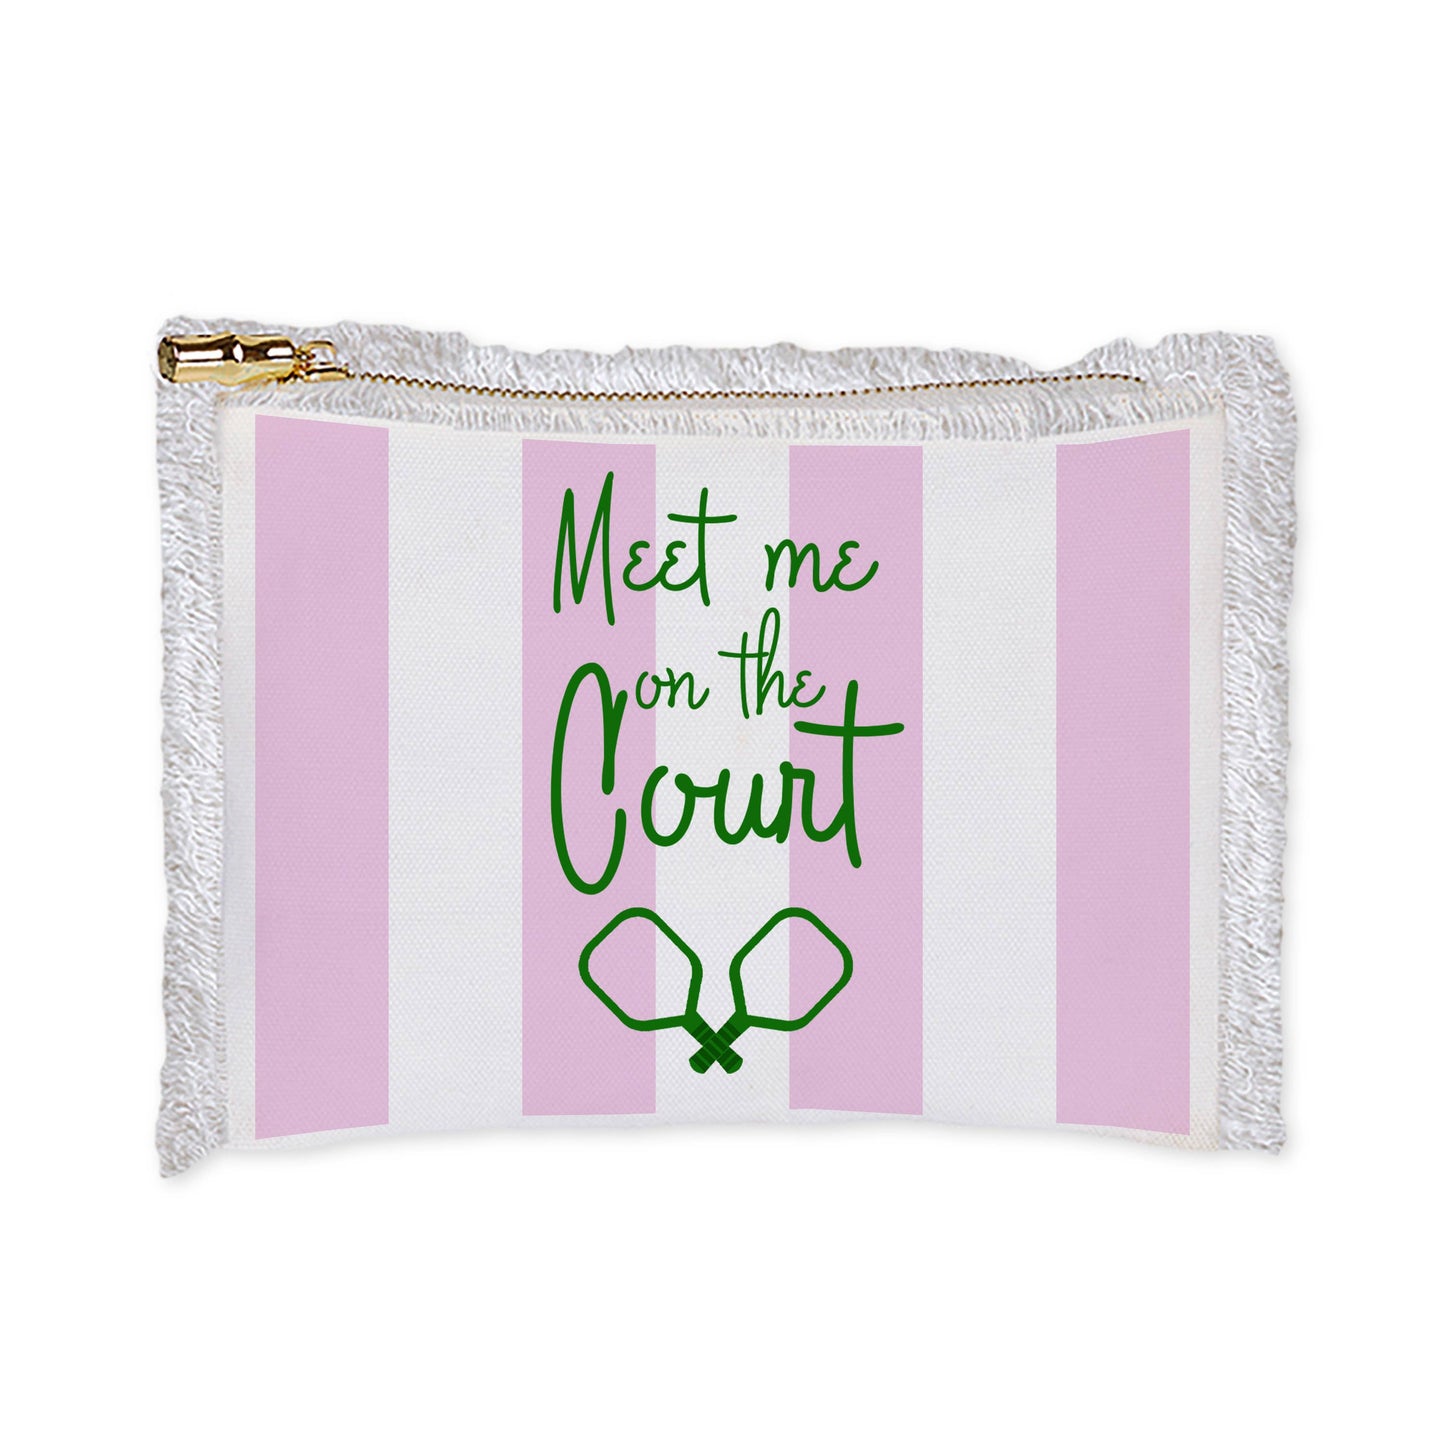 Meet me on the Court Pouch